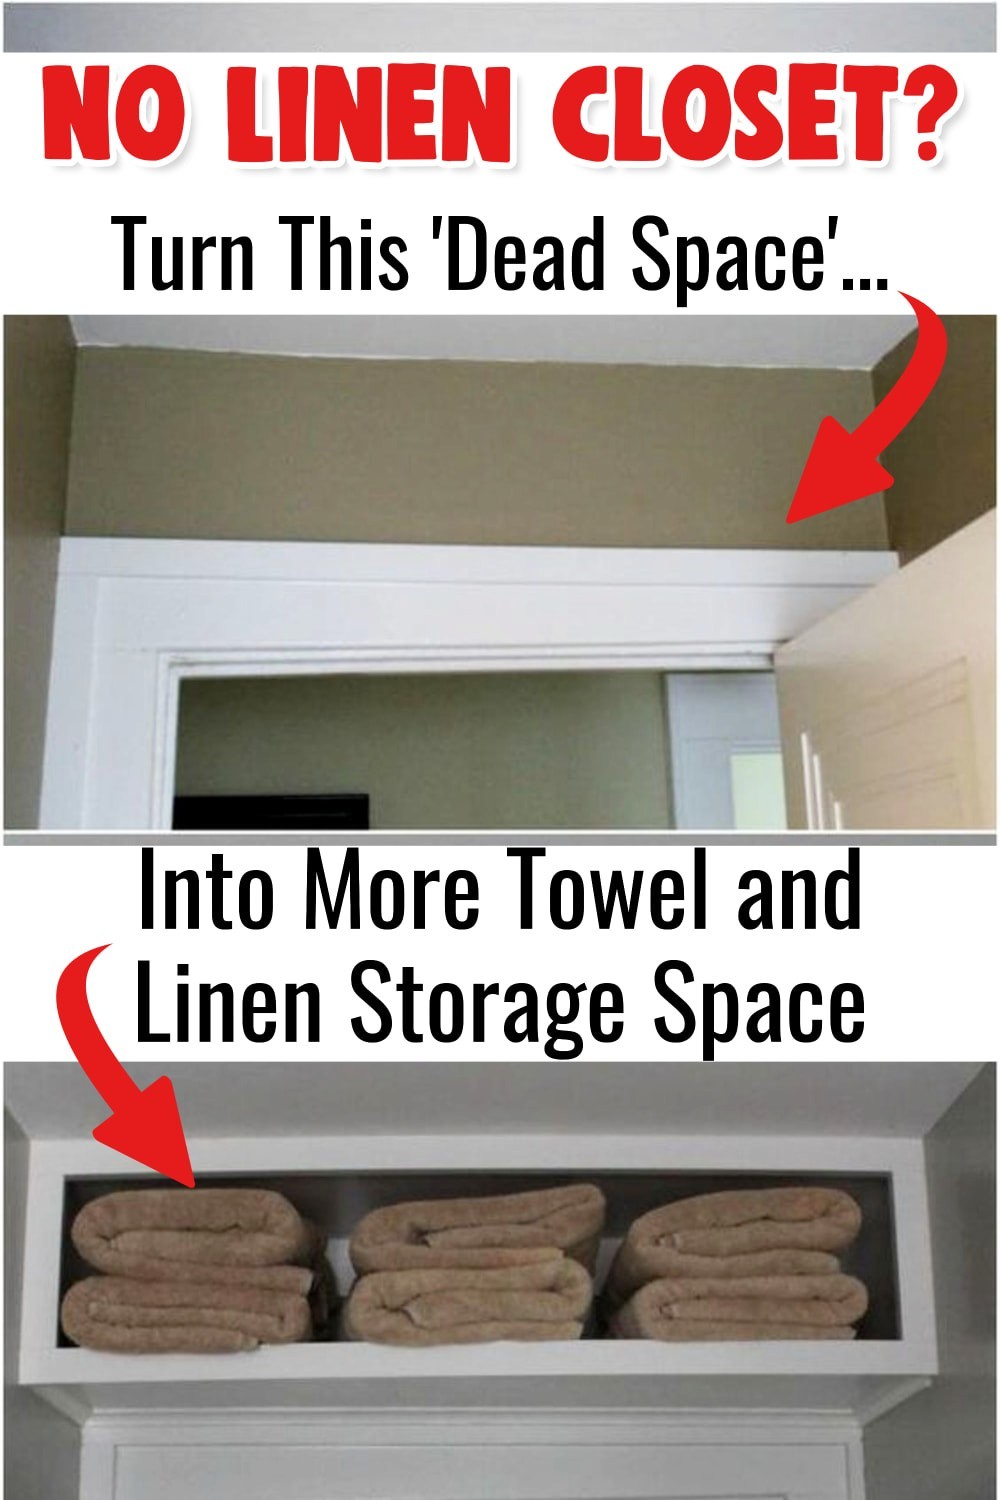 No Linen Closet Solutions - Linen storage ideas for small spaces when your new home doesn't have a linen closet